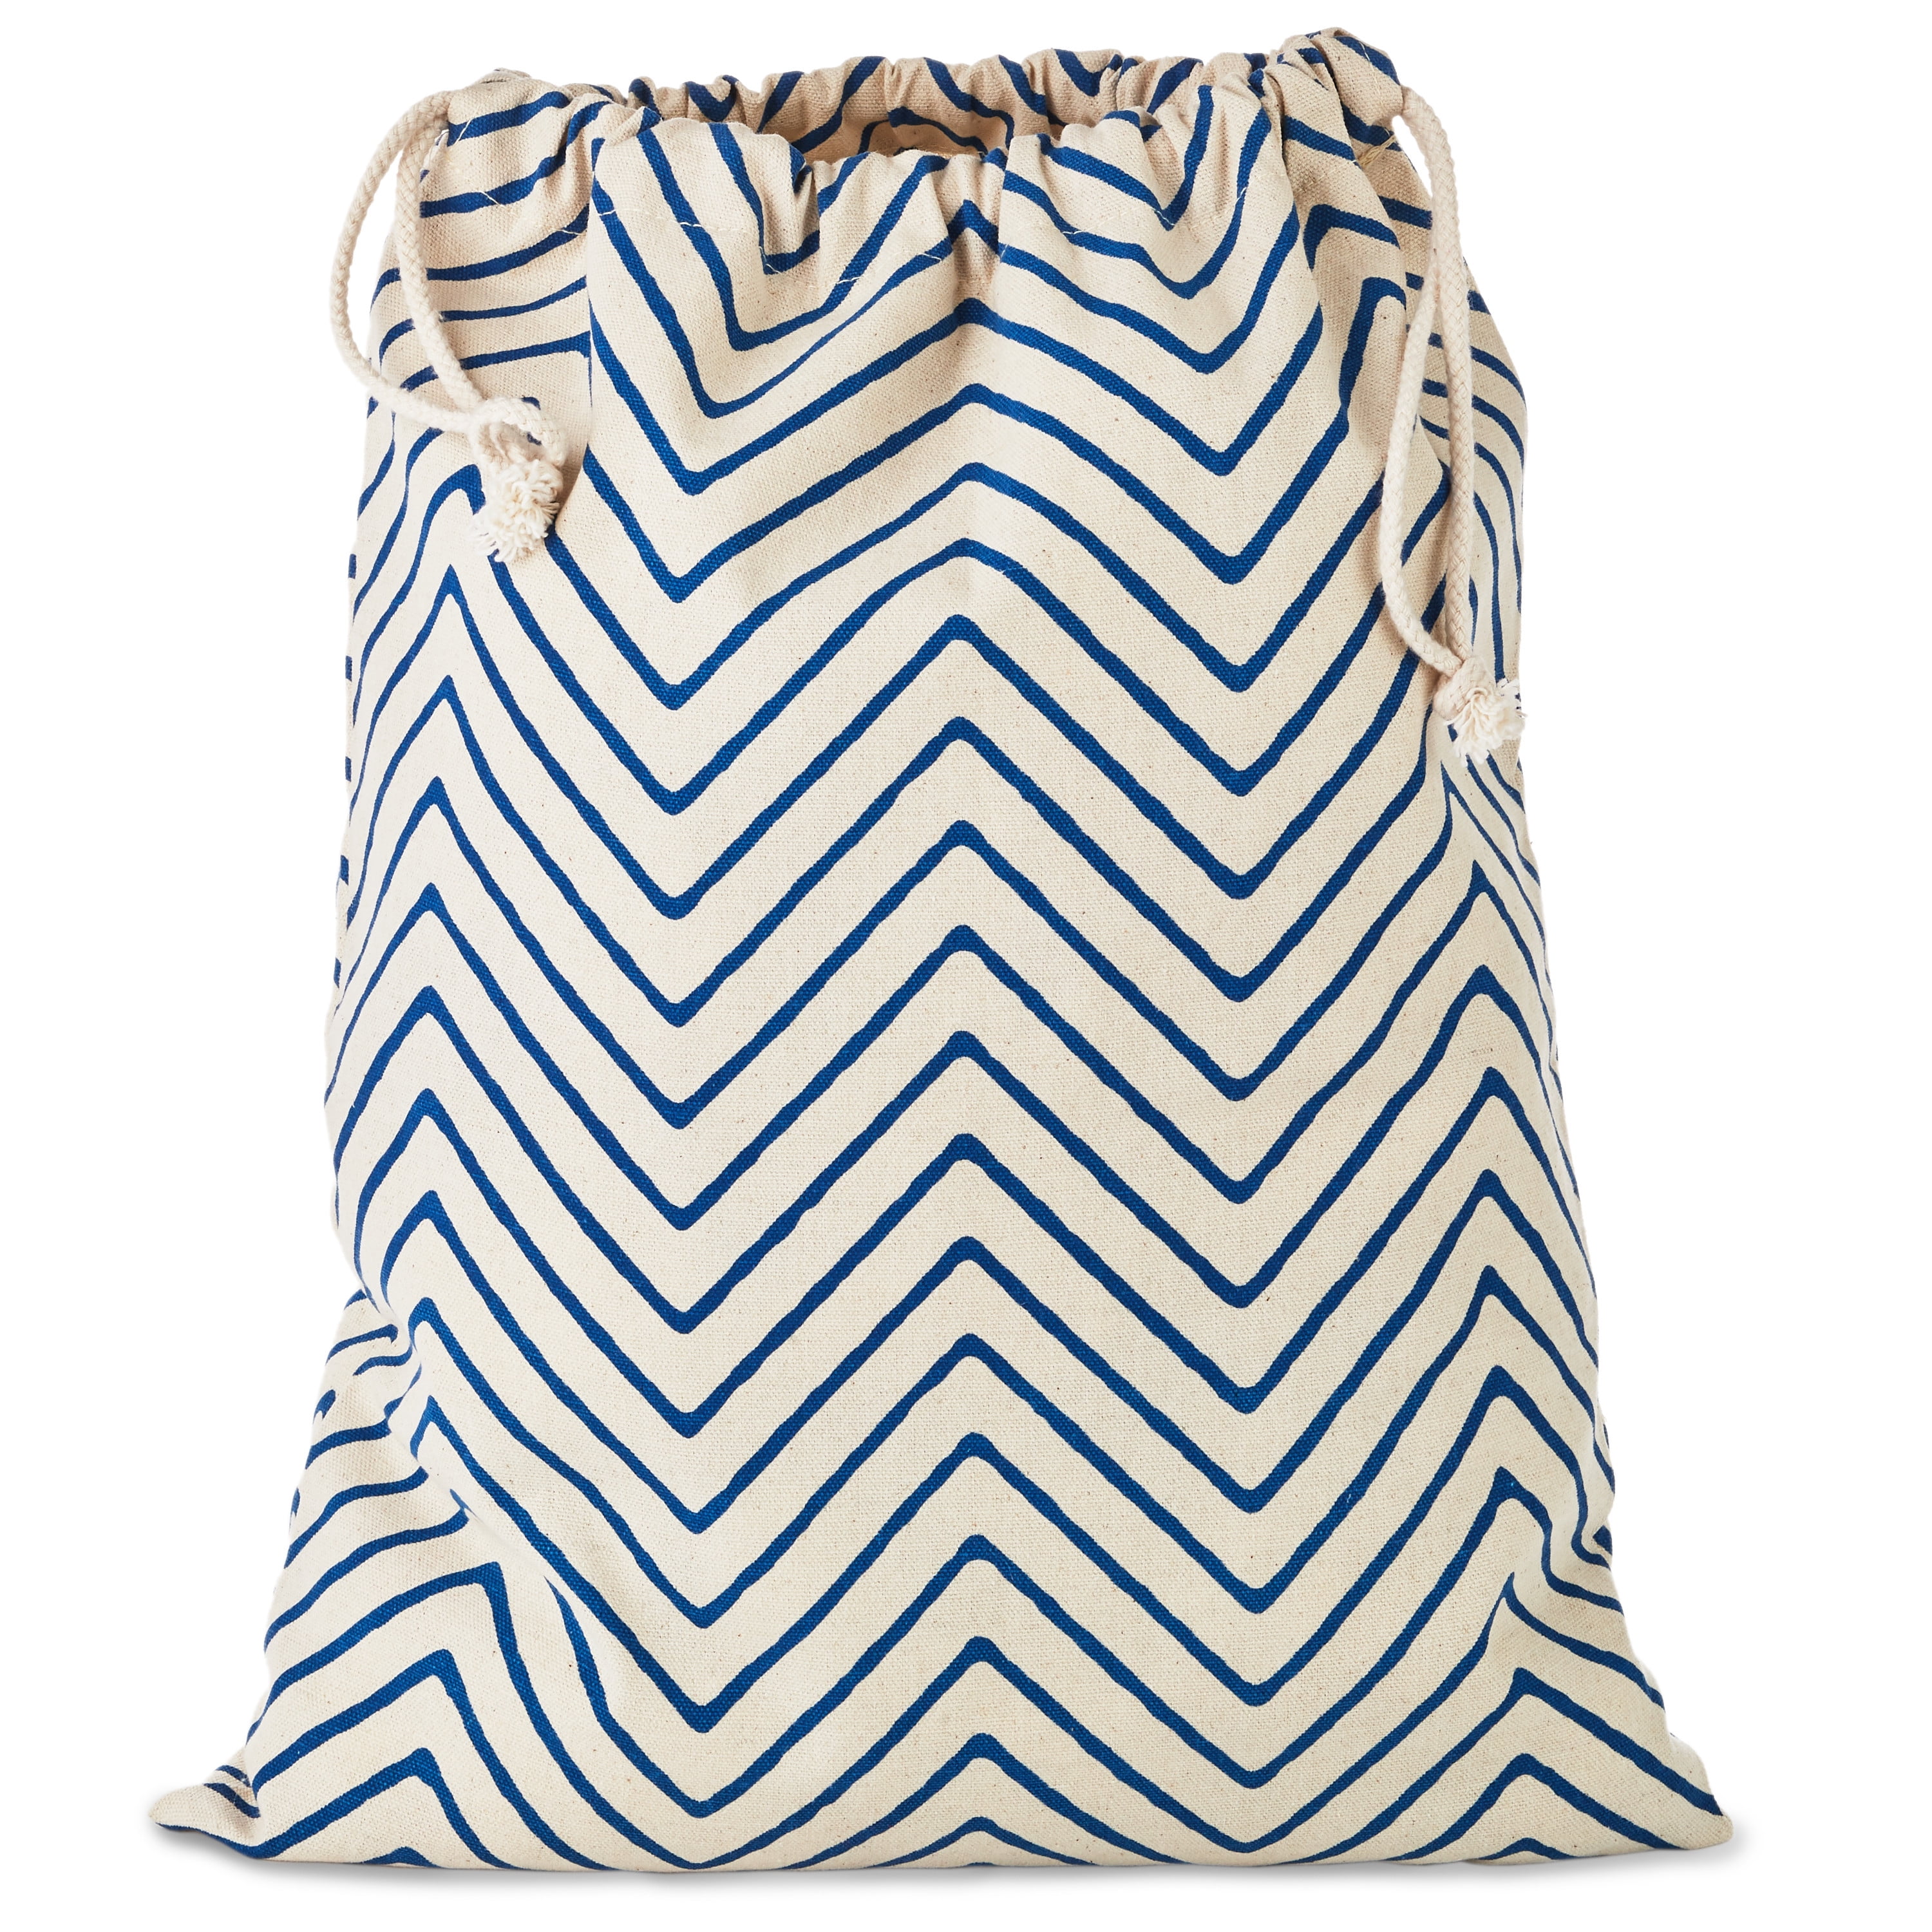 Extra Large Cotton Drawstring Bags or Sacks From Stock UK | Printed Cotton  Bags Within 2 Weeks From 25 Bags